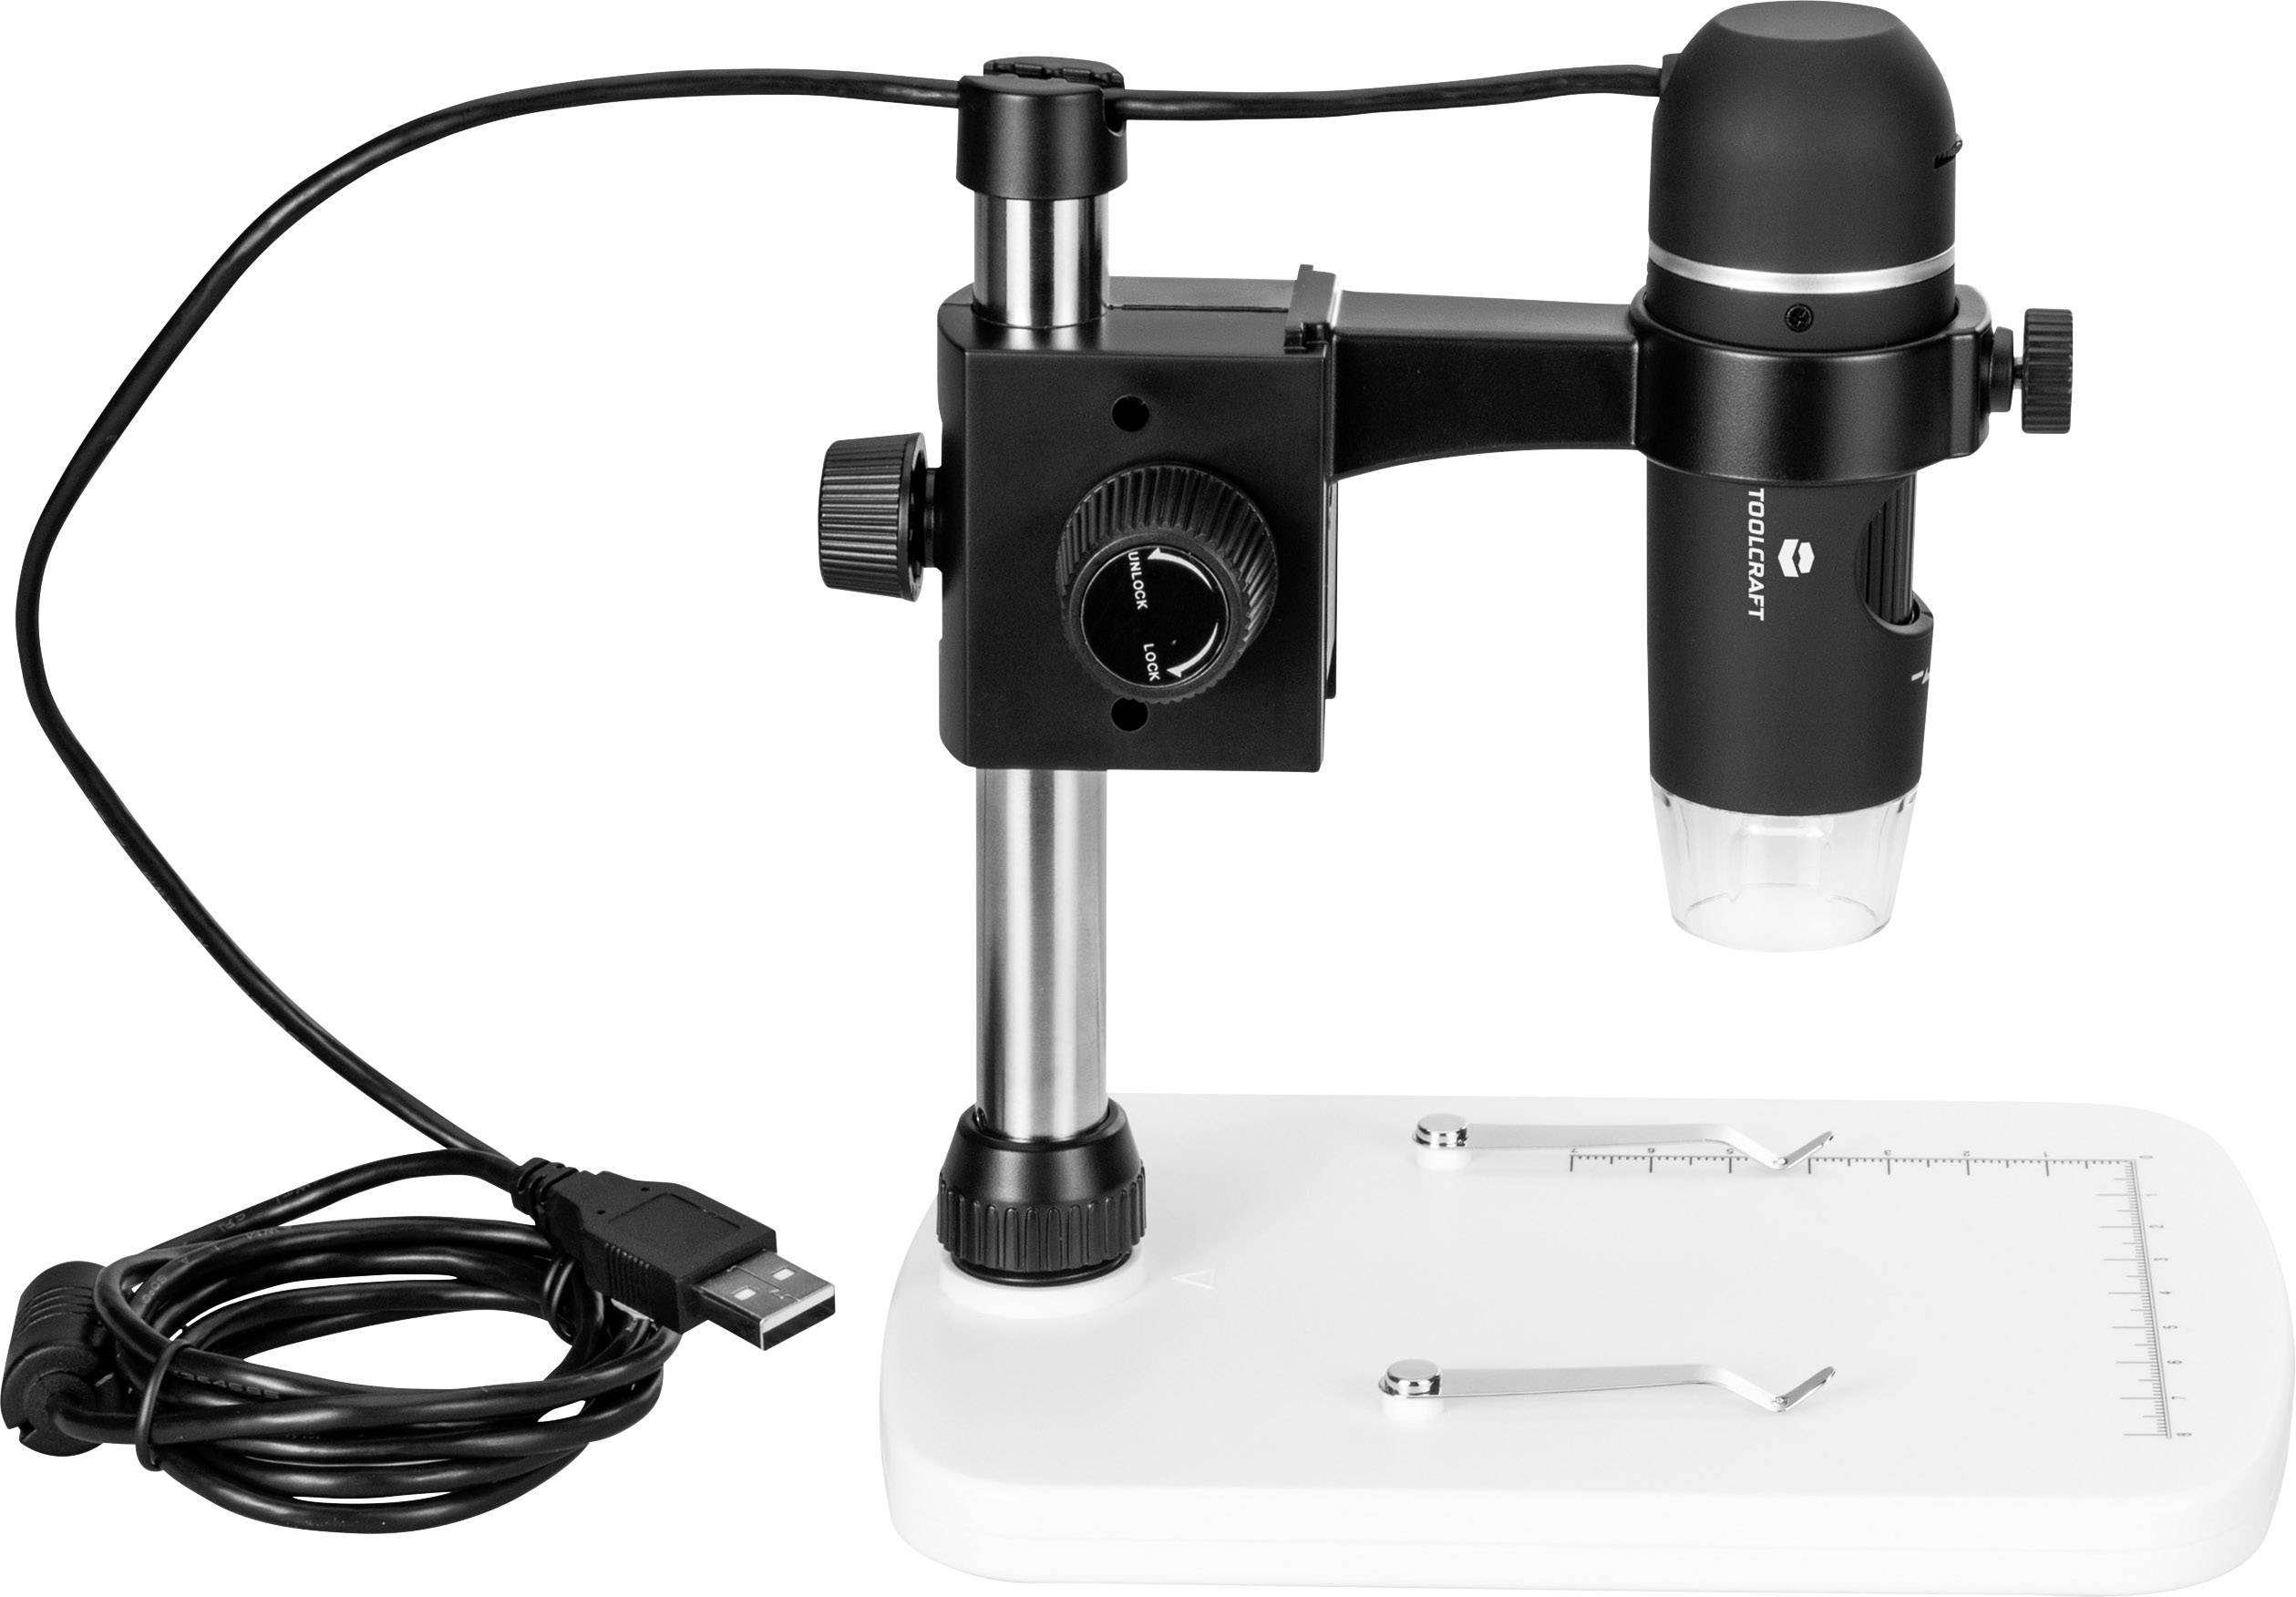 Microscope USB TOOLCRAFT 5 Mill. pixel Grossissement numérique (max.): 150  x - Conrad Electronic France